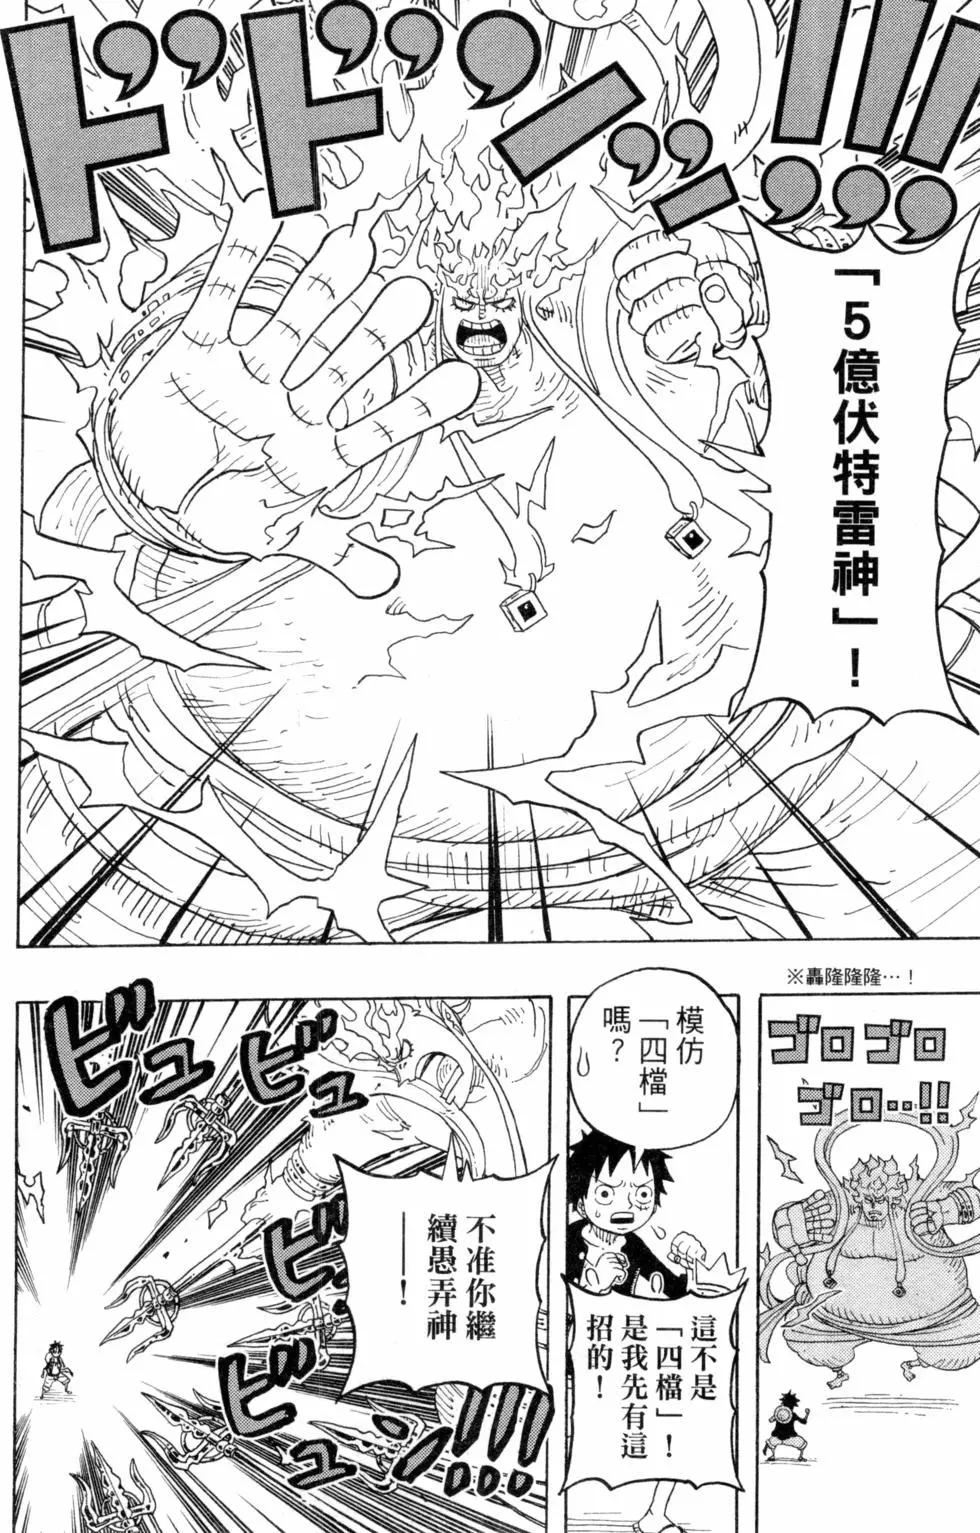 One piece party - 第06卷(2/4) - 5